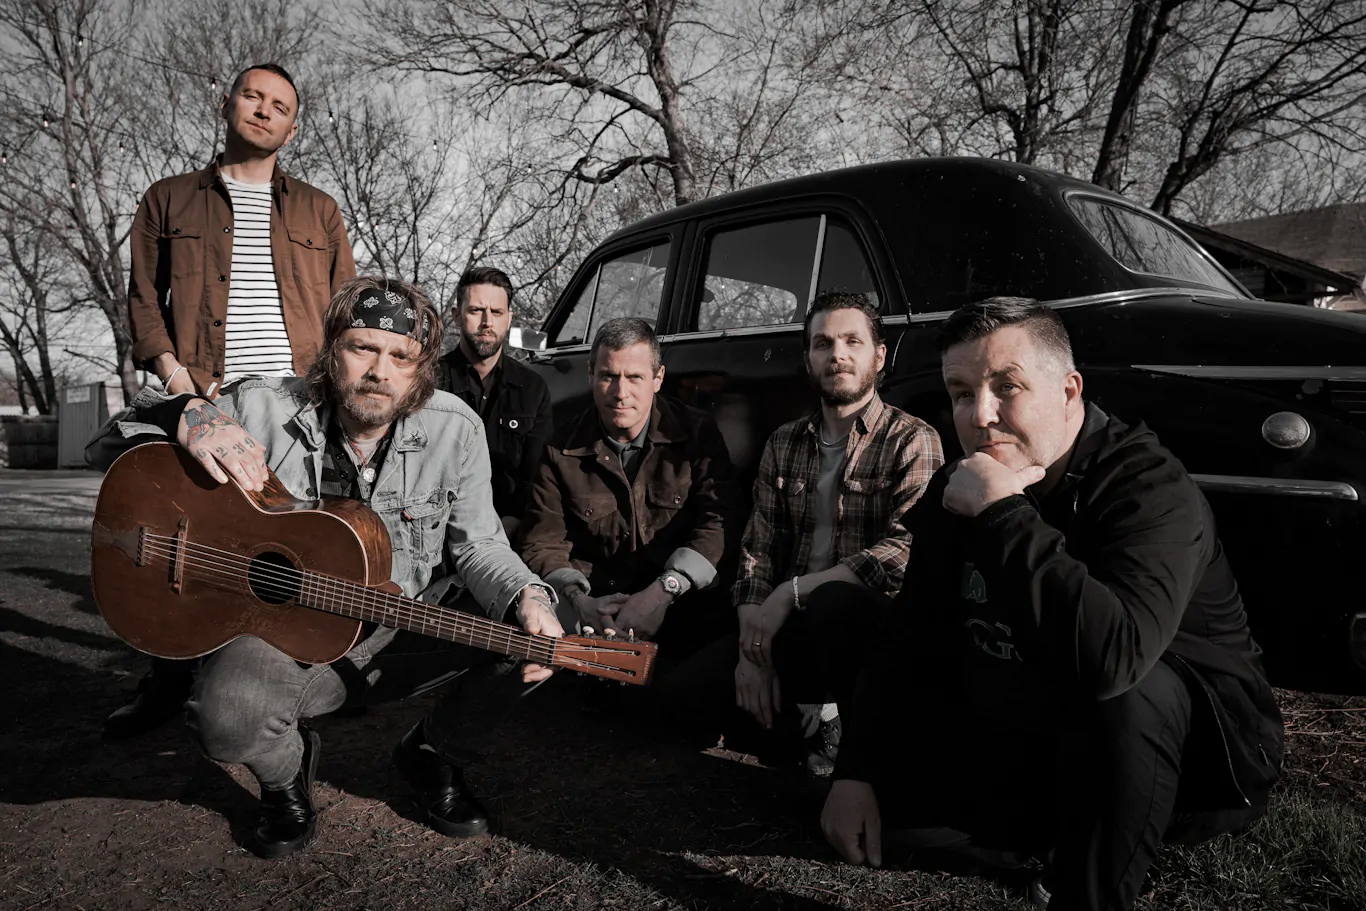 DROPKICK MURPHYS bring Woody Guthrie’s words to life on new single ‘Ten Times More’